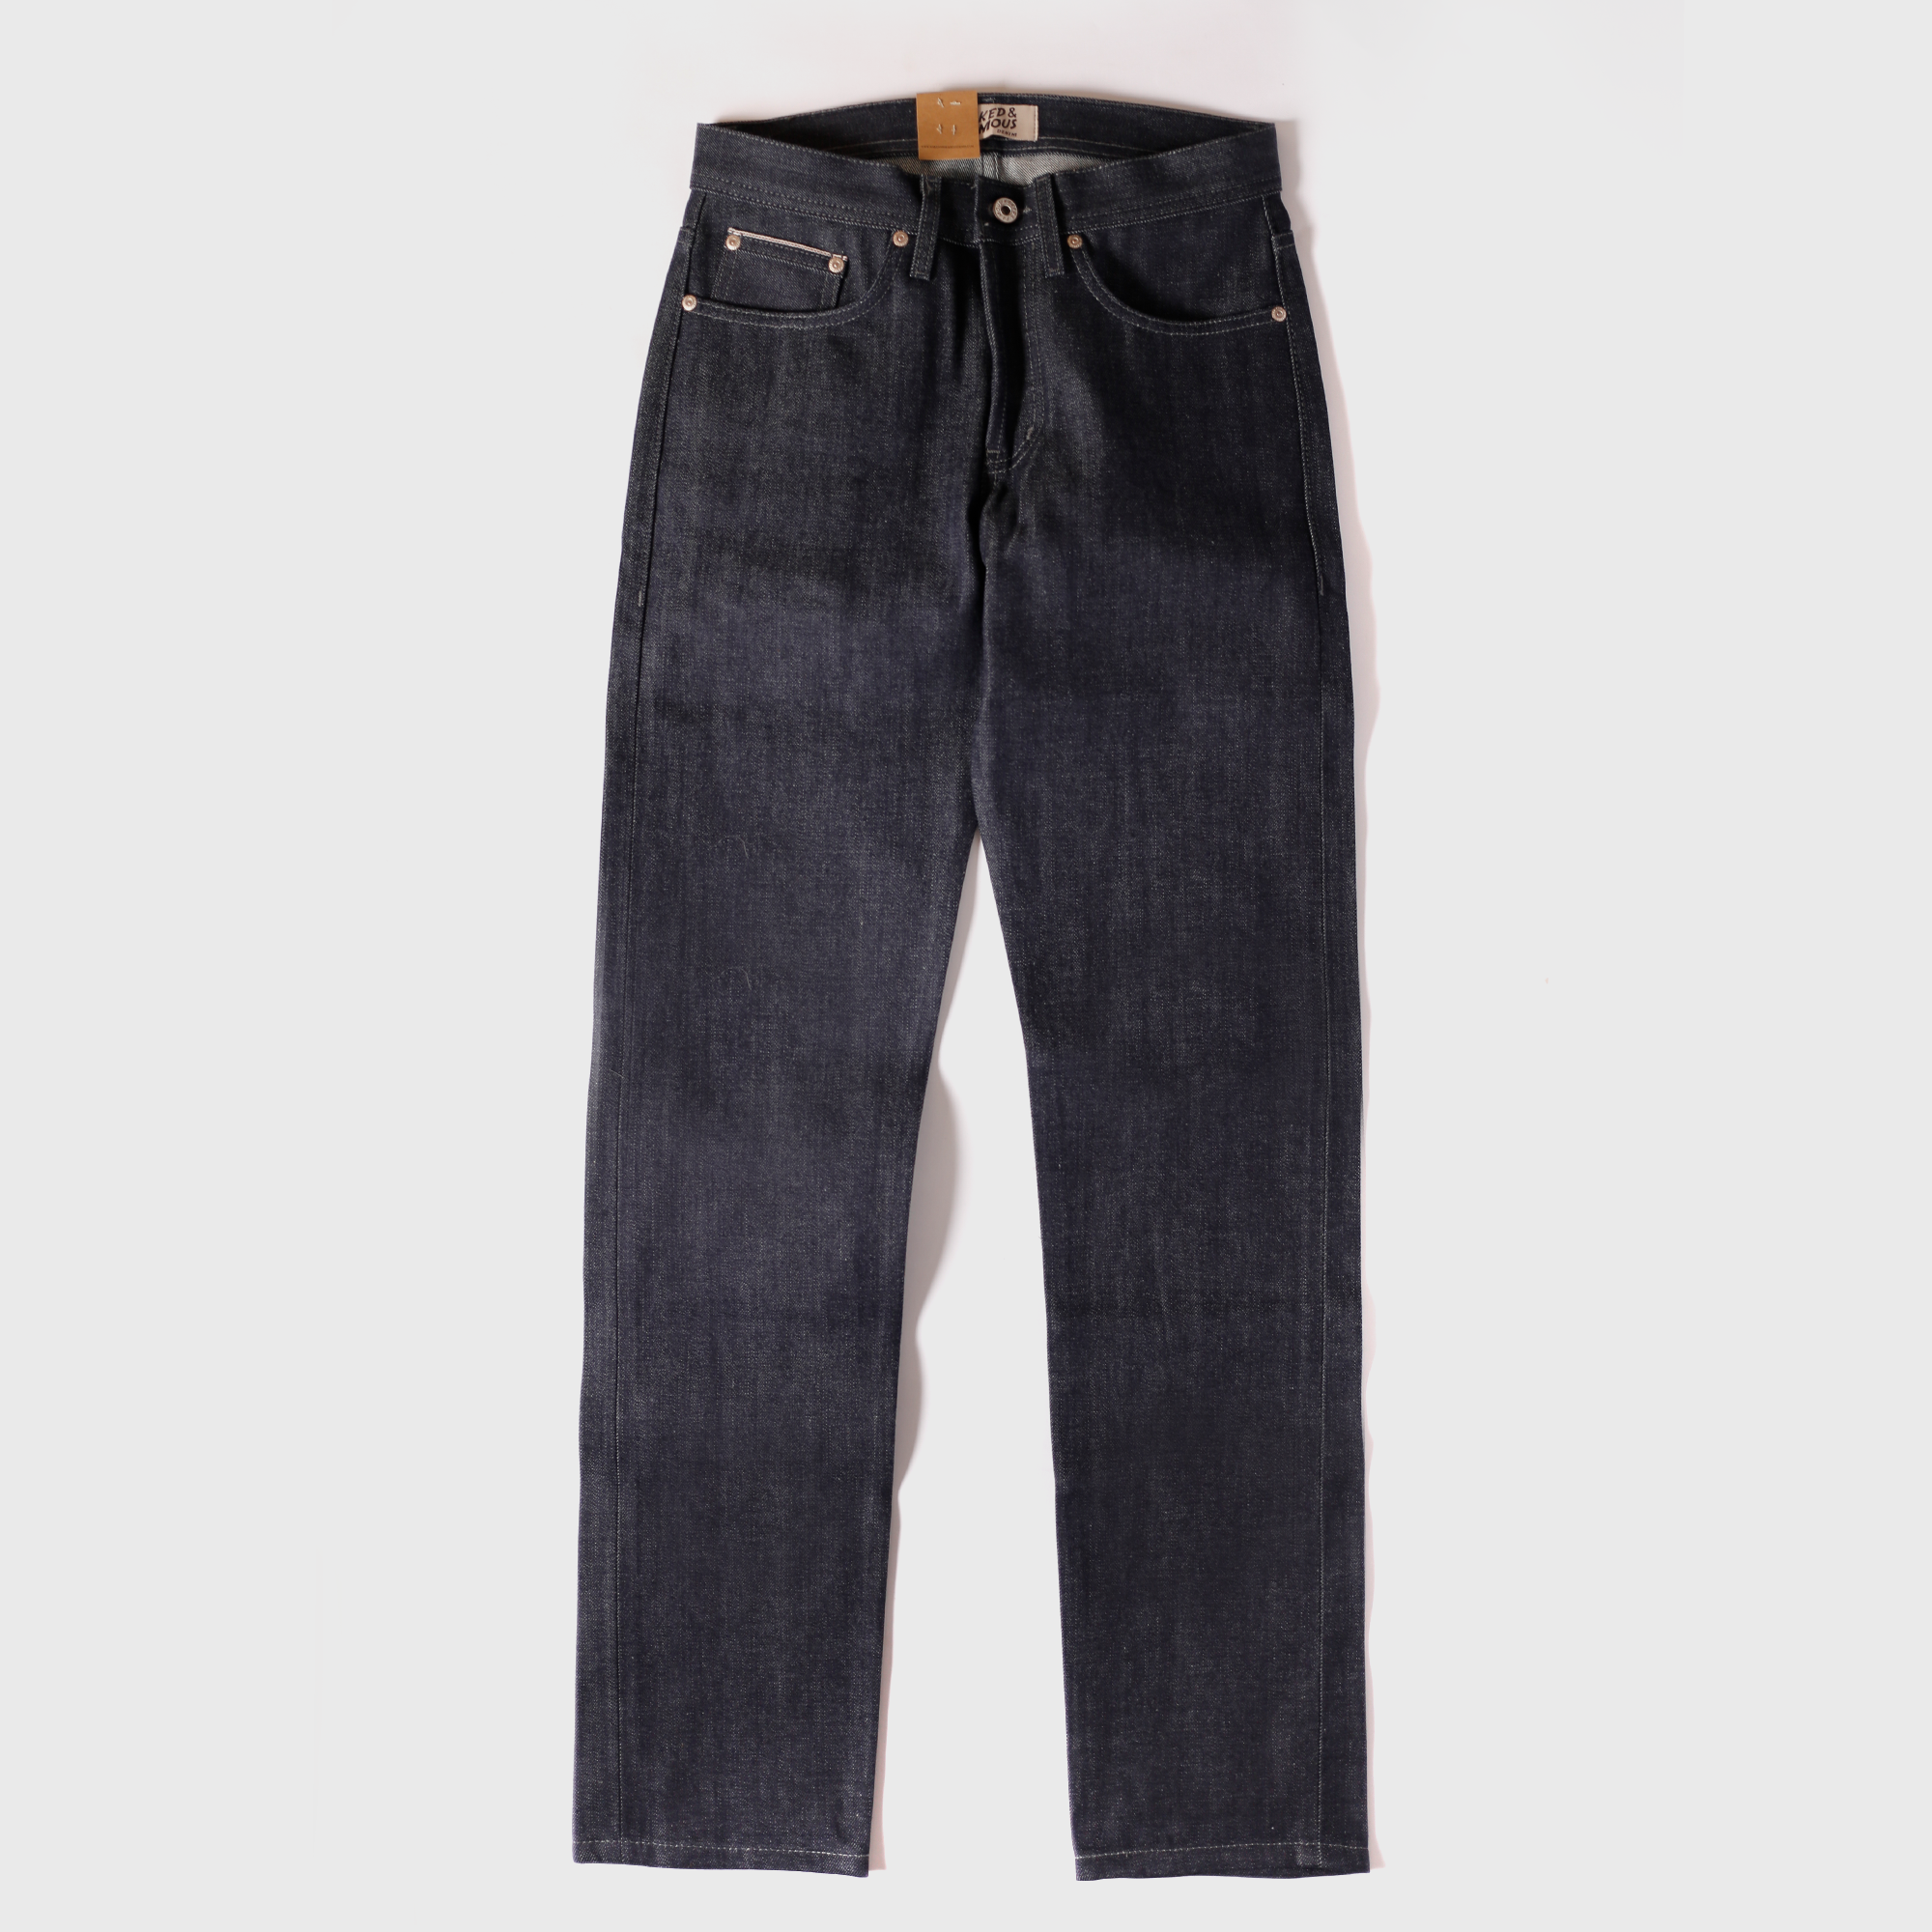 Naked and Famous - Weird Guy - Indigo Selvedge – MUTTONHEAD